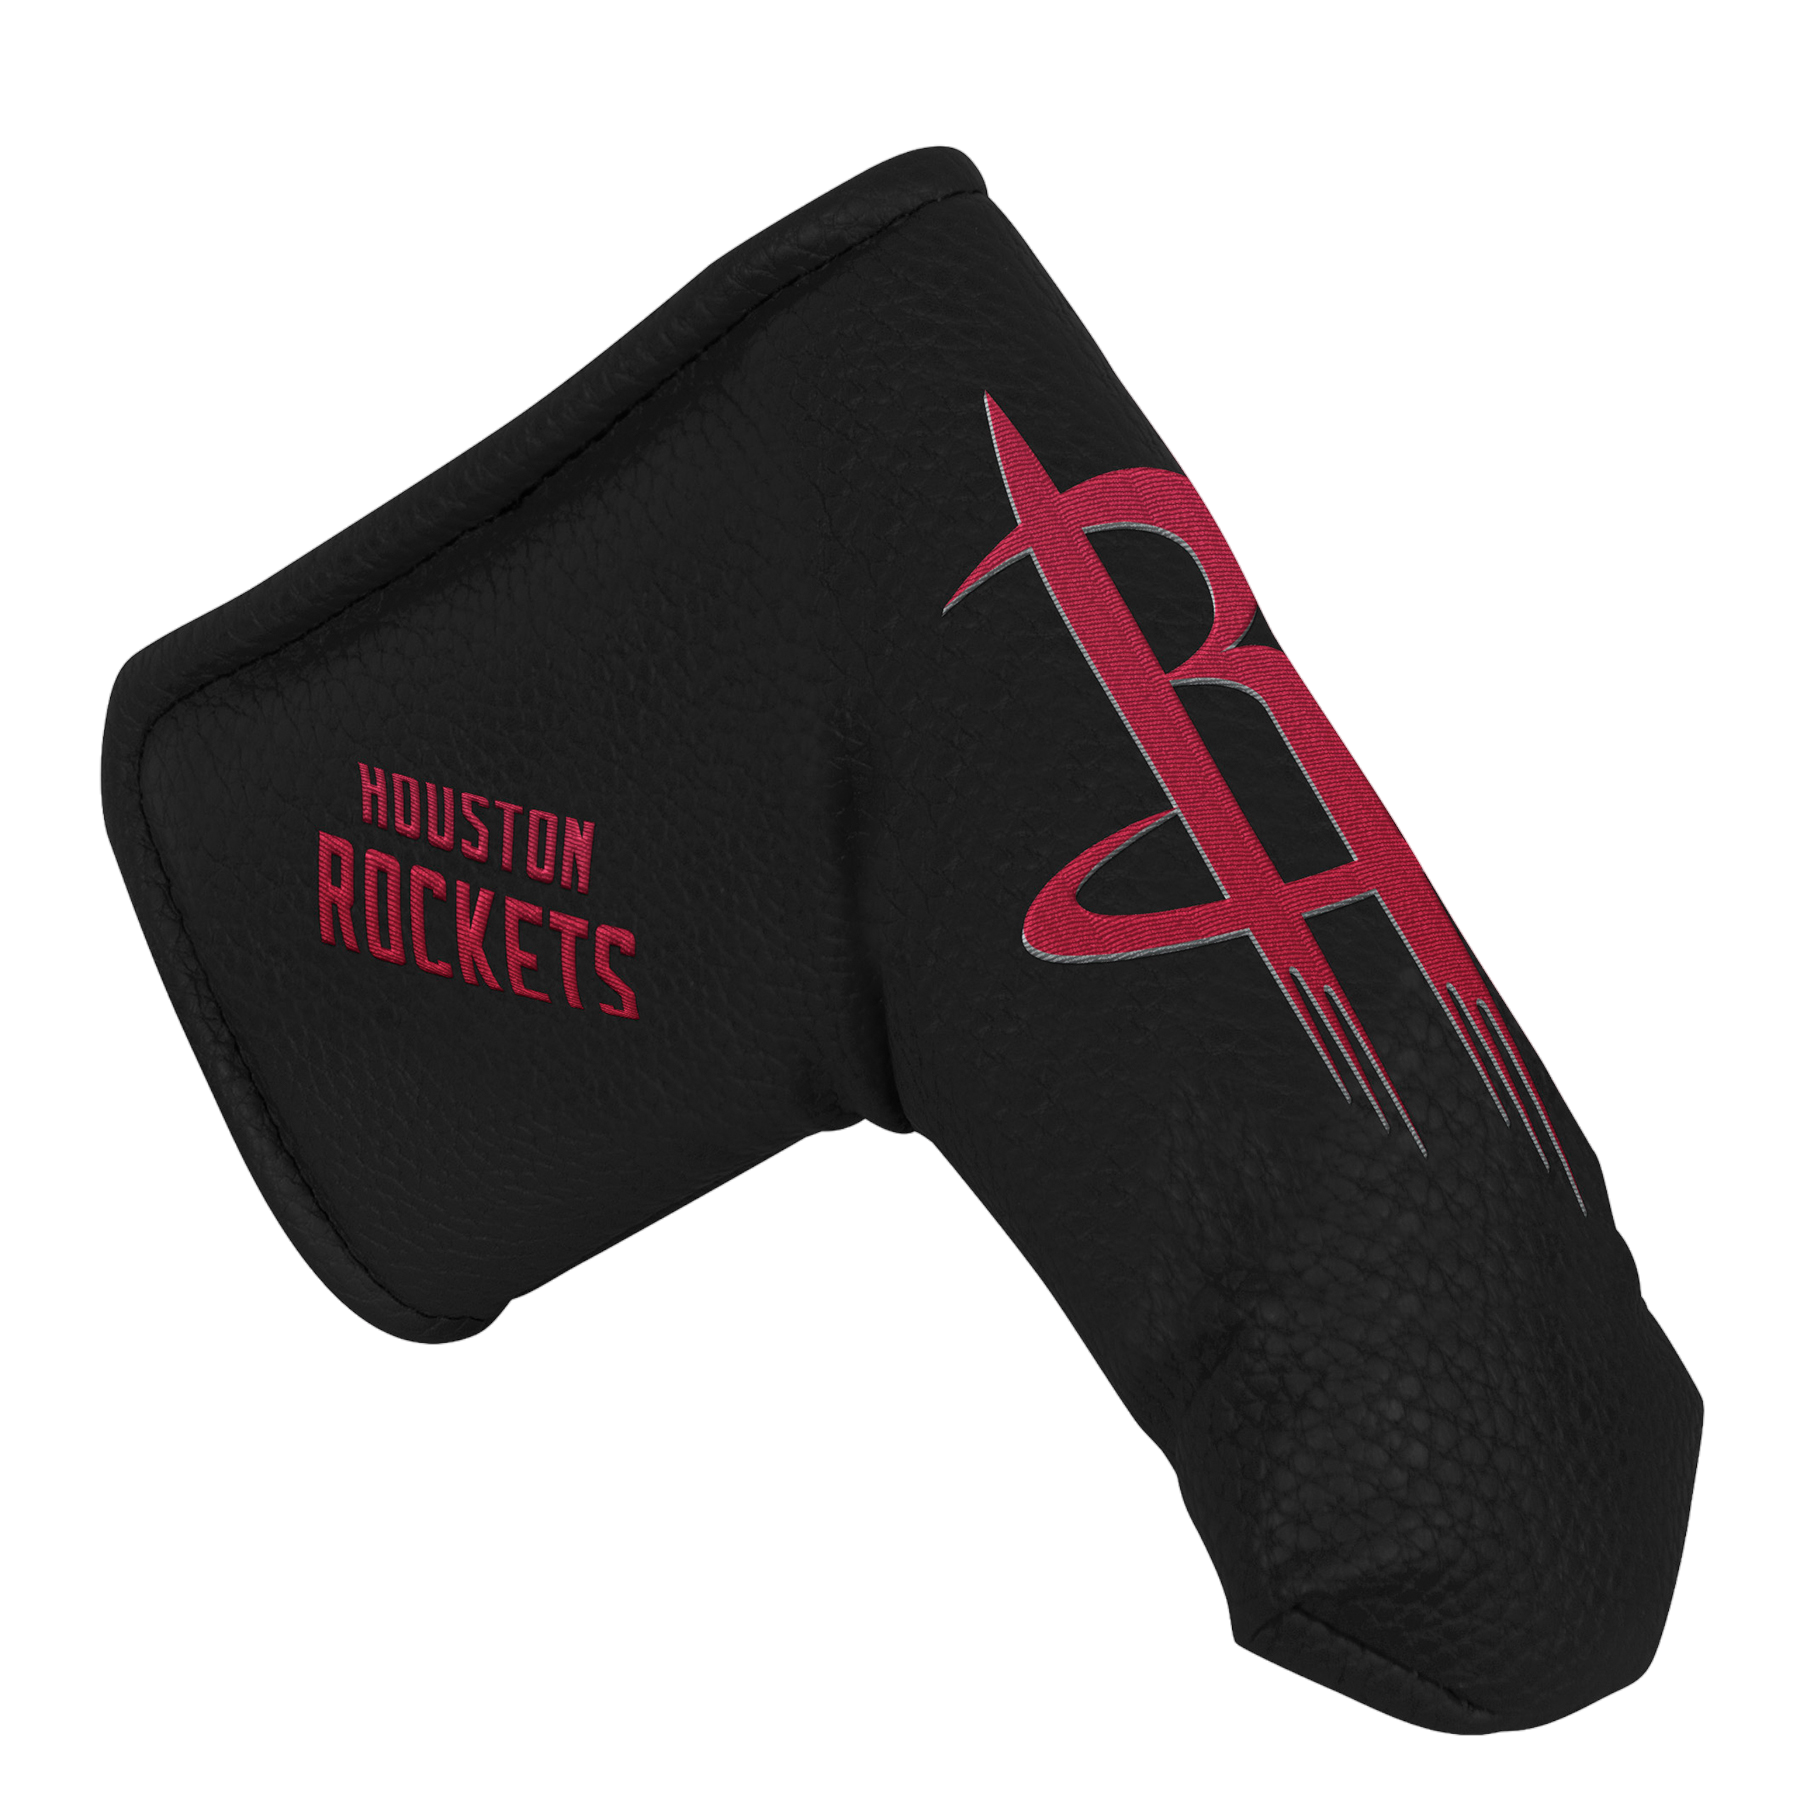 Houston Rockets Blade Putter Cover